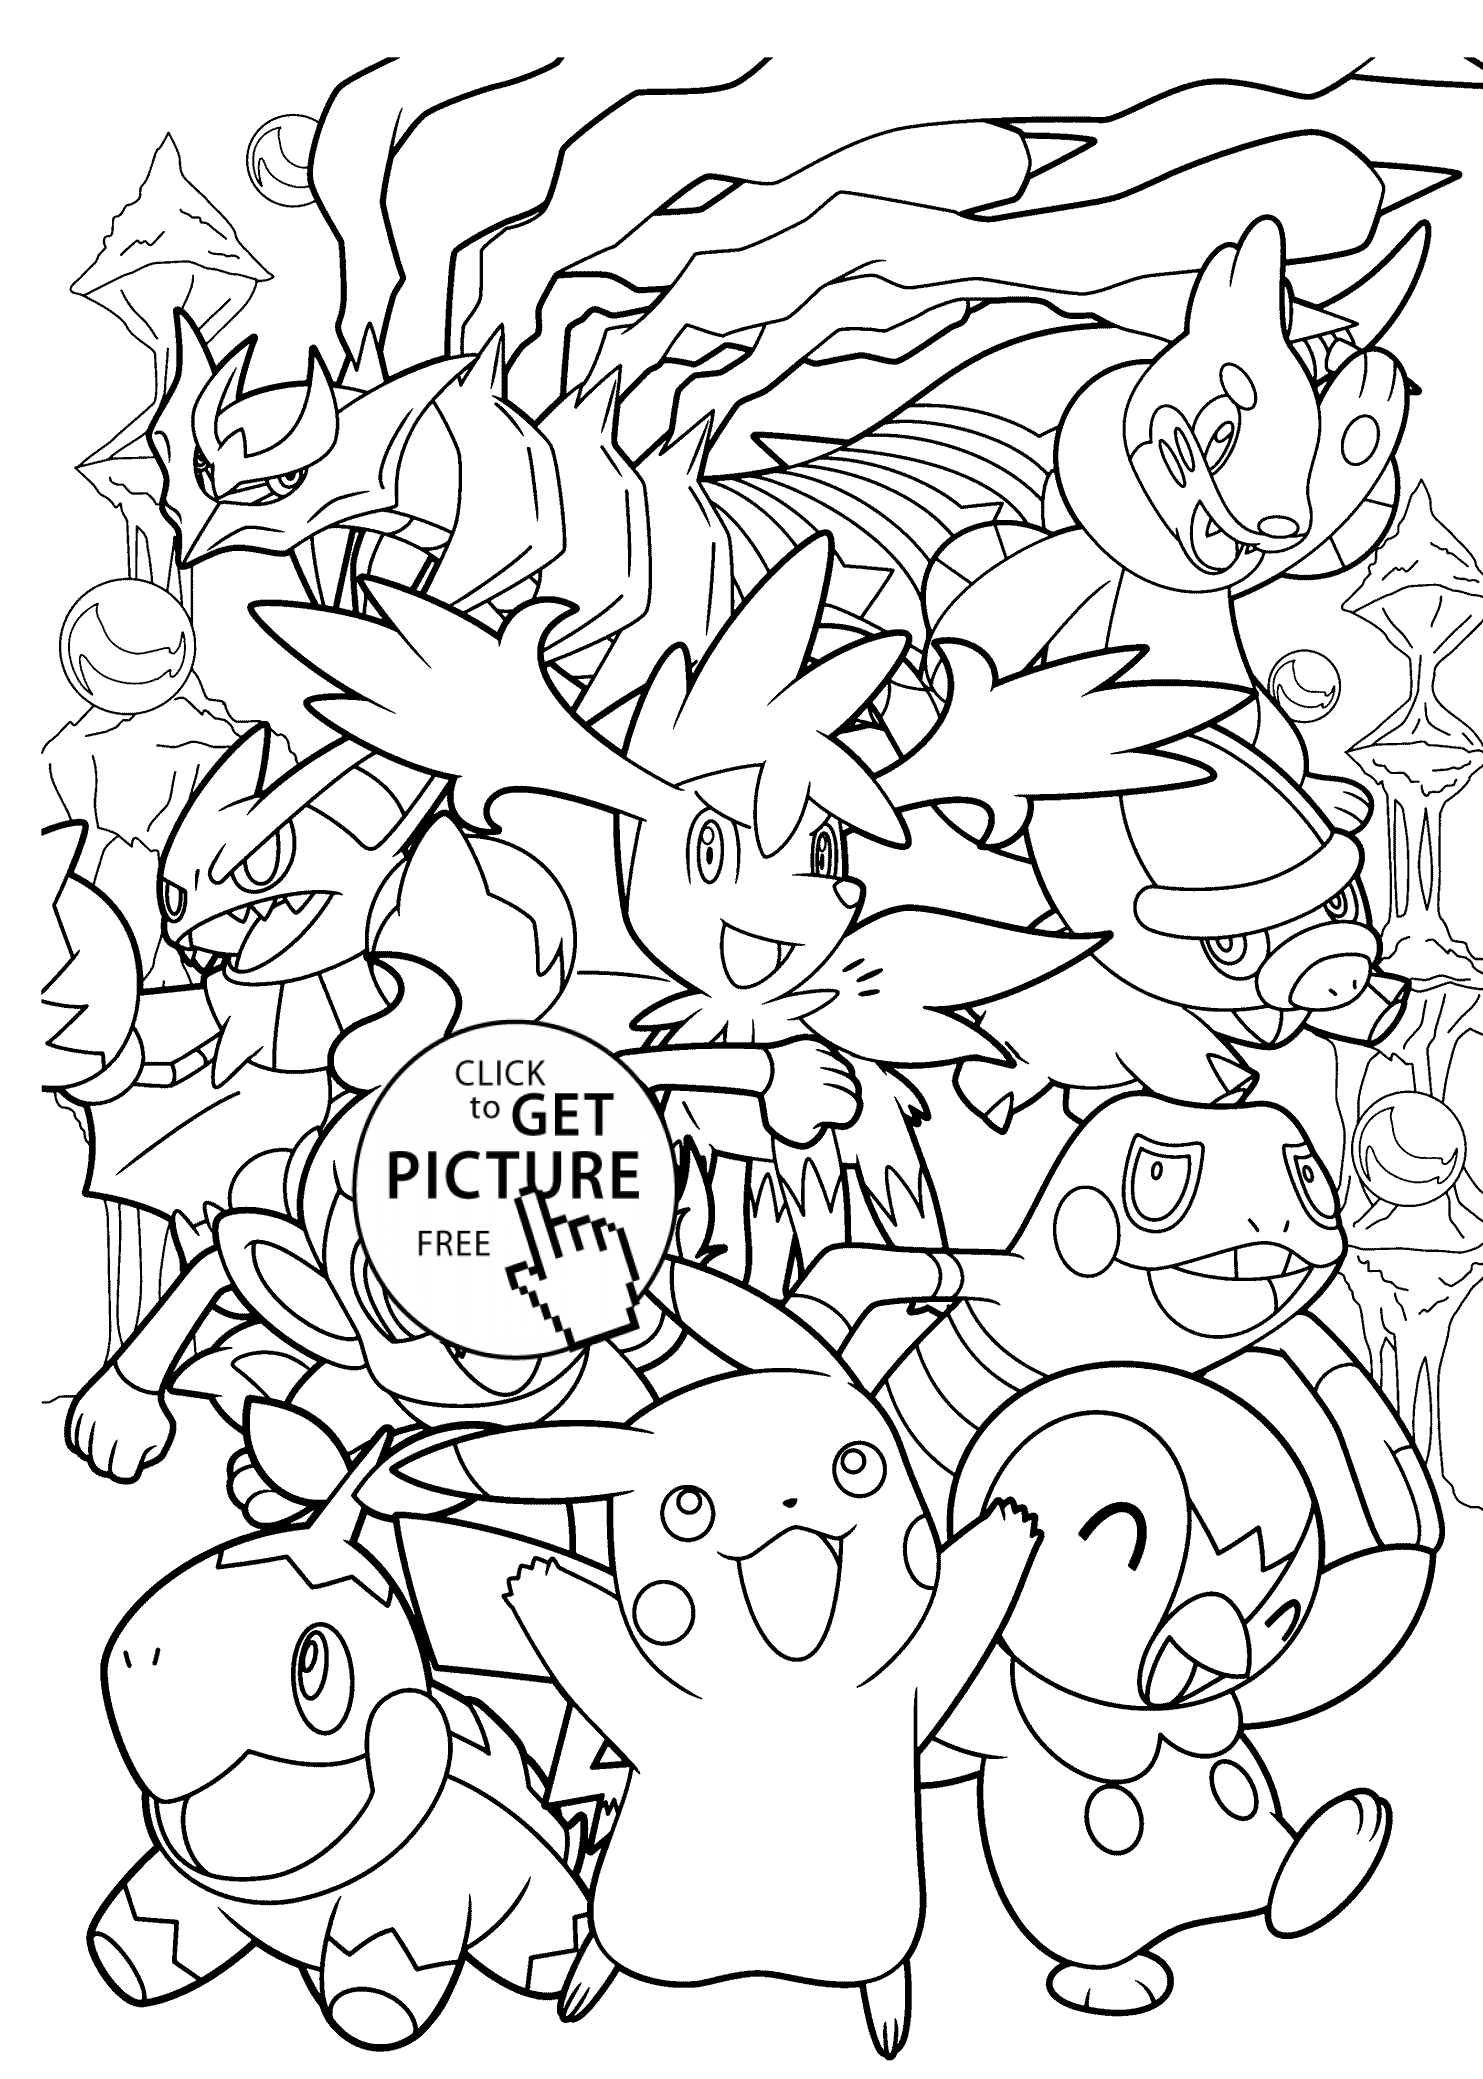 All Pokemon Anime Coloring Pages For Kids, Printable Free ...